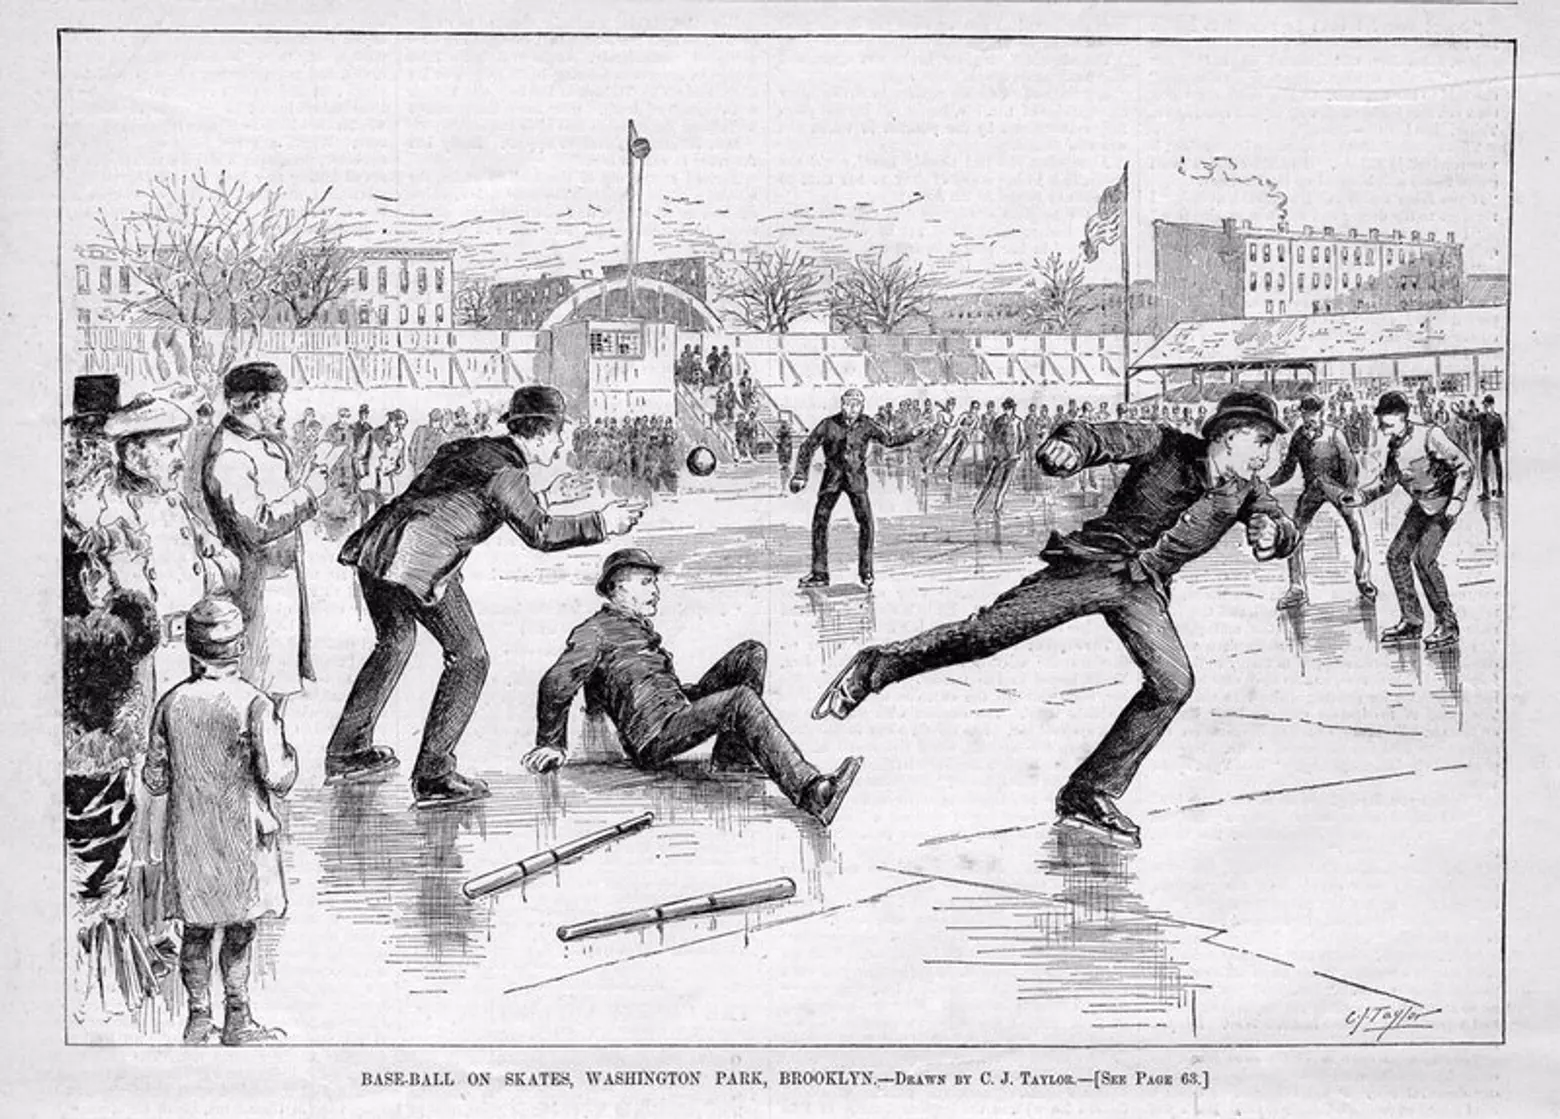 In the 19th century, Brooklynites played baseball on ice